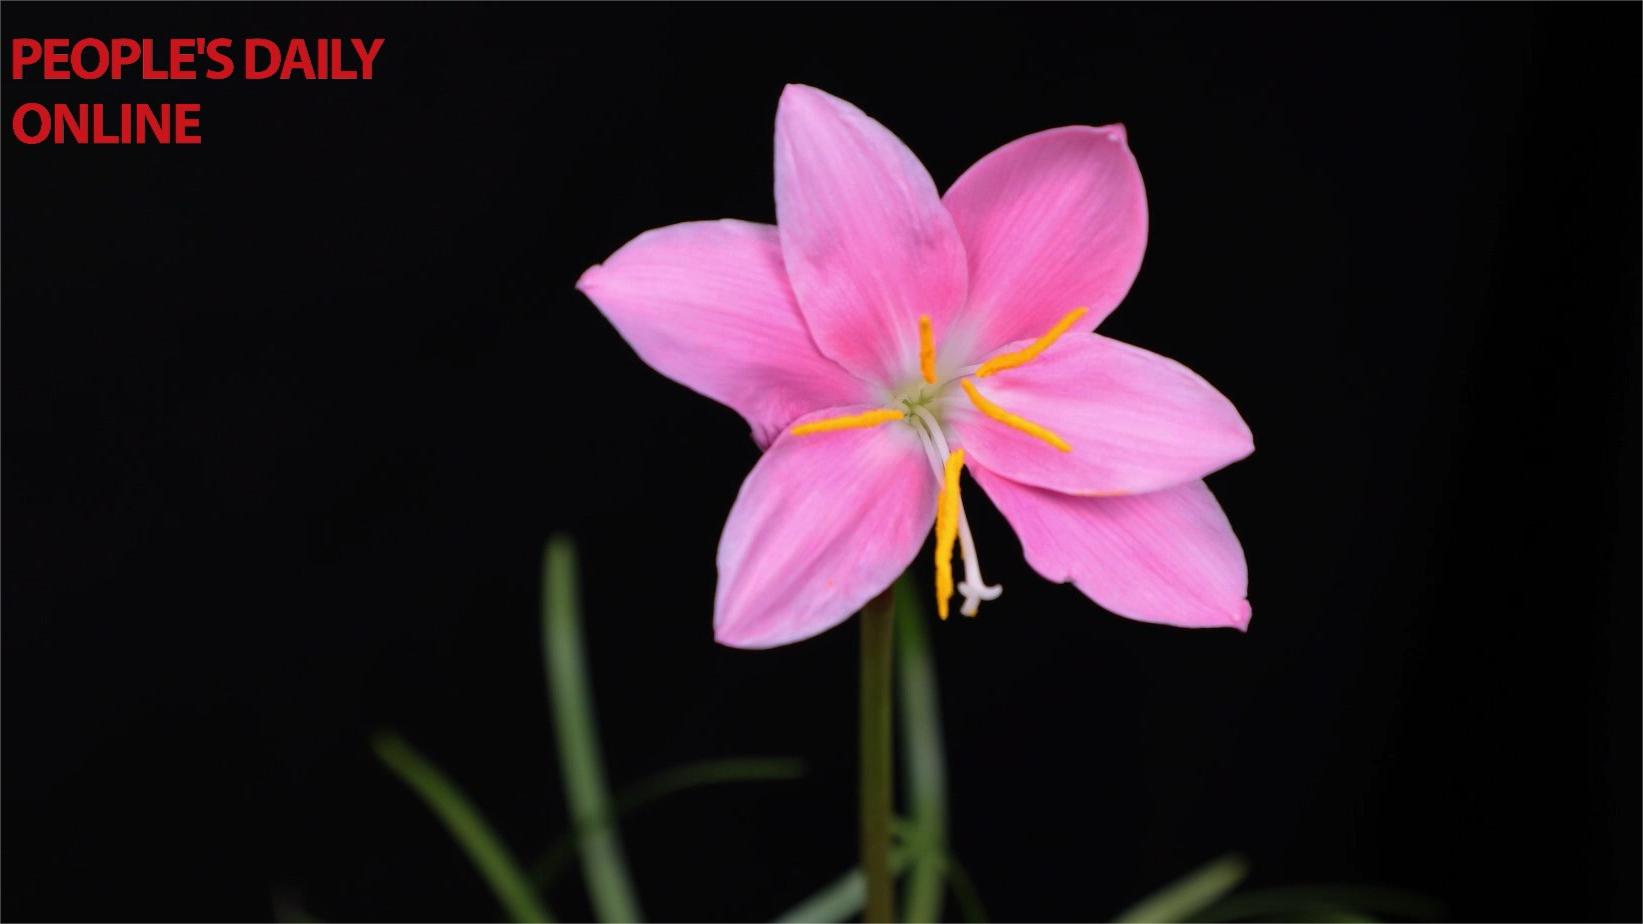 Rain lily flowers bloom in SW China’s Yunnan